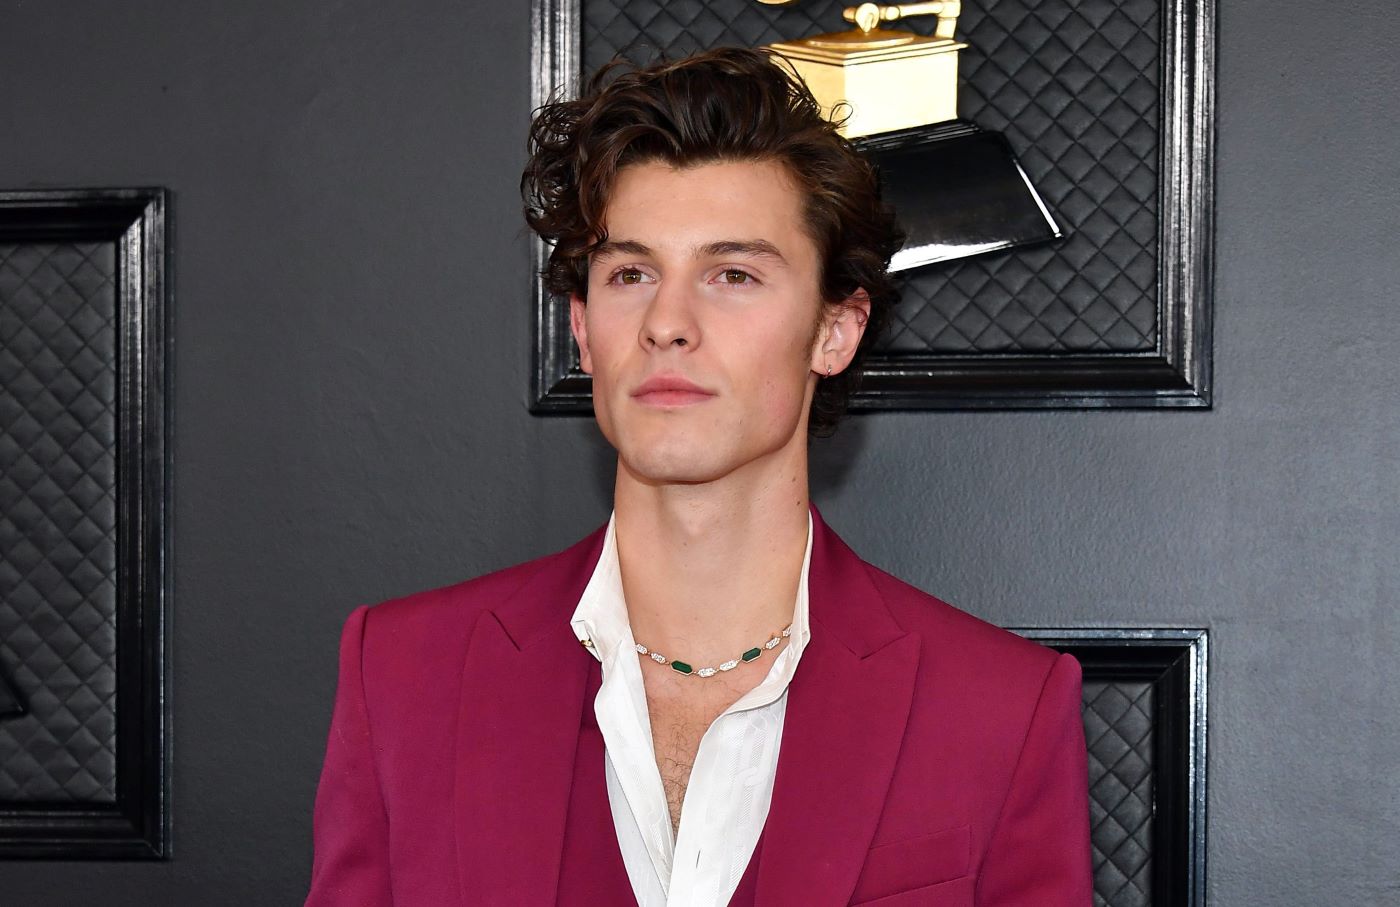 Shawn Mendes standing in front of a black background with golden awards on it wearing a red suit with a white undershirt.